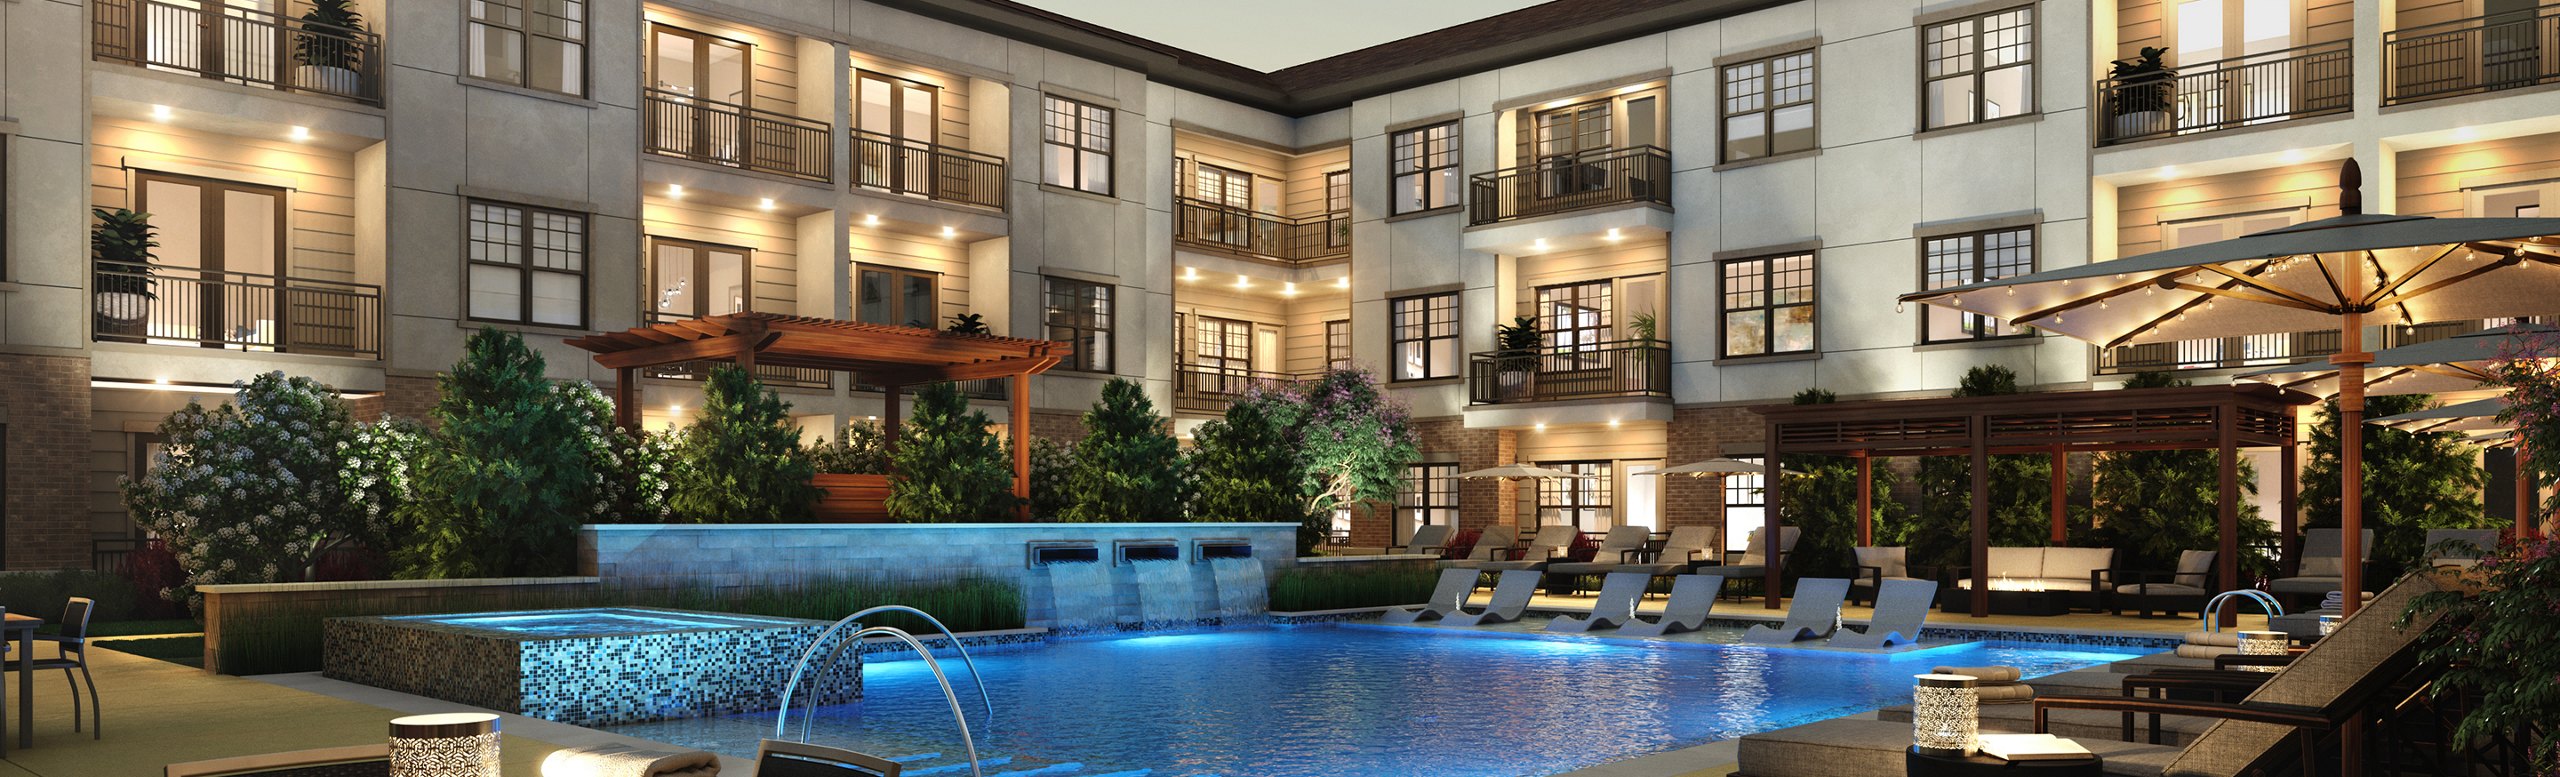 Evening view of a luxurious apartment complex with illuminated balconies overlooking a serene pool area with lounge chairs and a covered seating area.